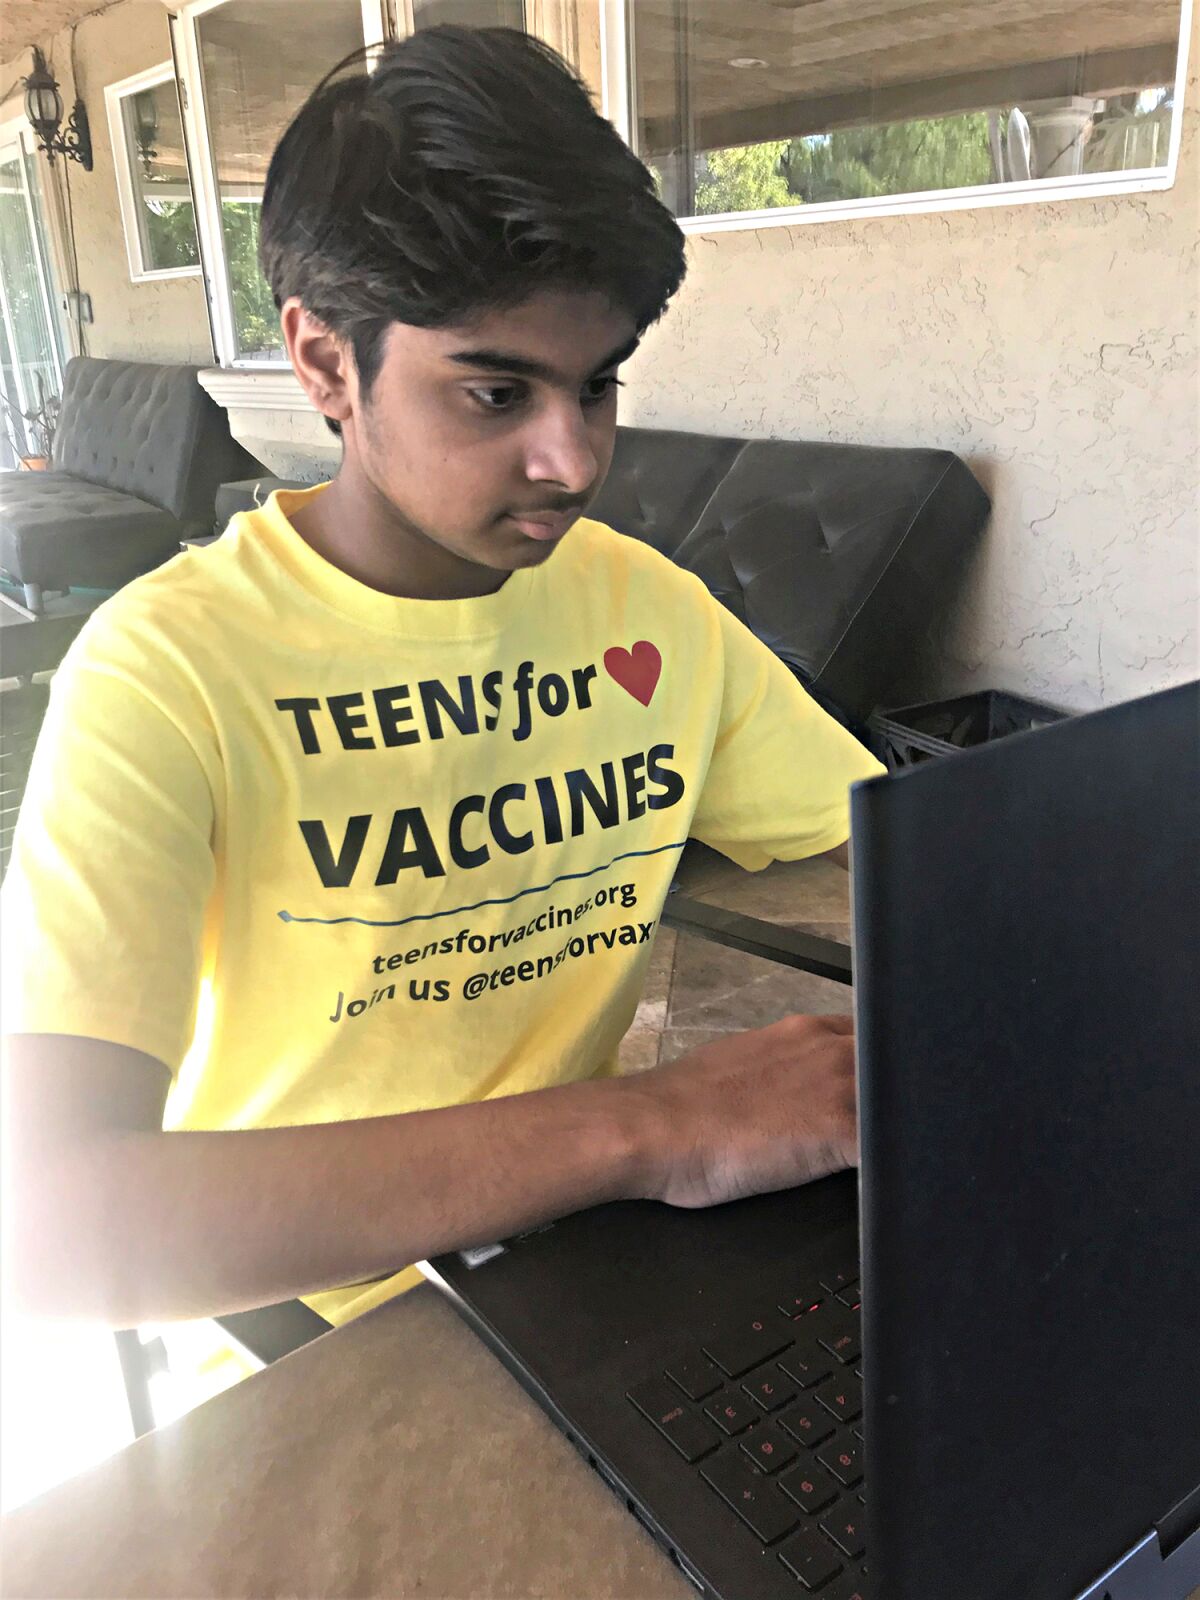 Arin Parsa, a 14-year-old from San Jose, searches for posts about vaccines.